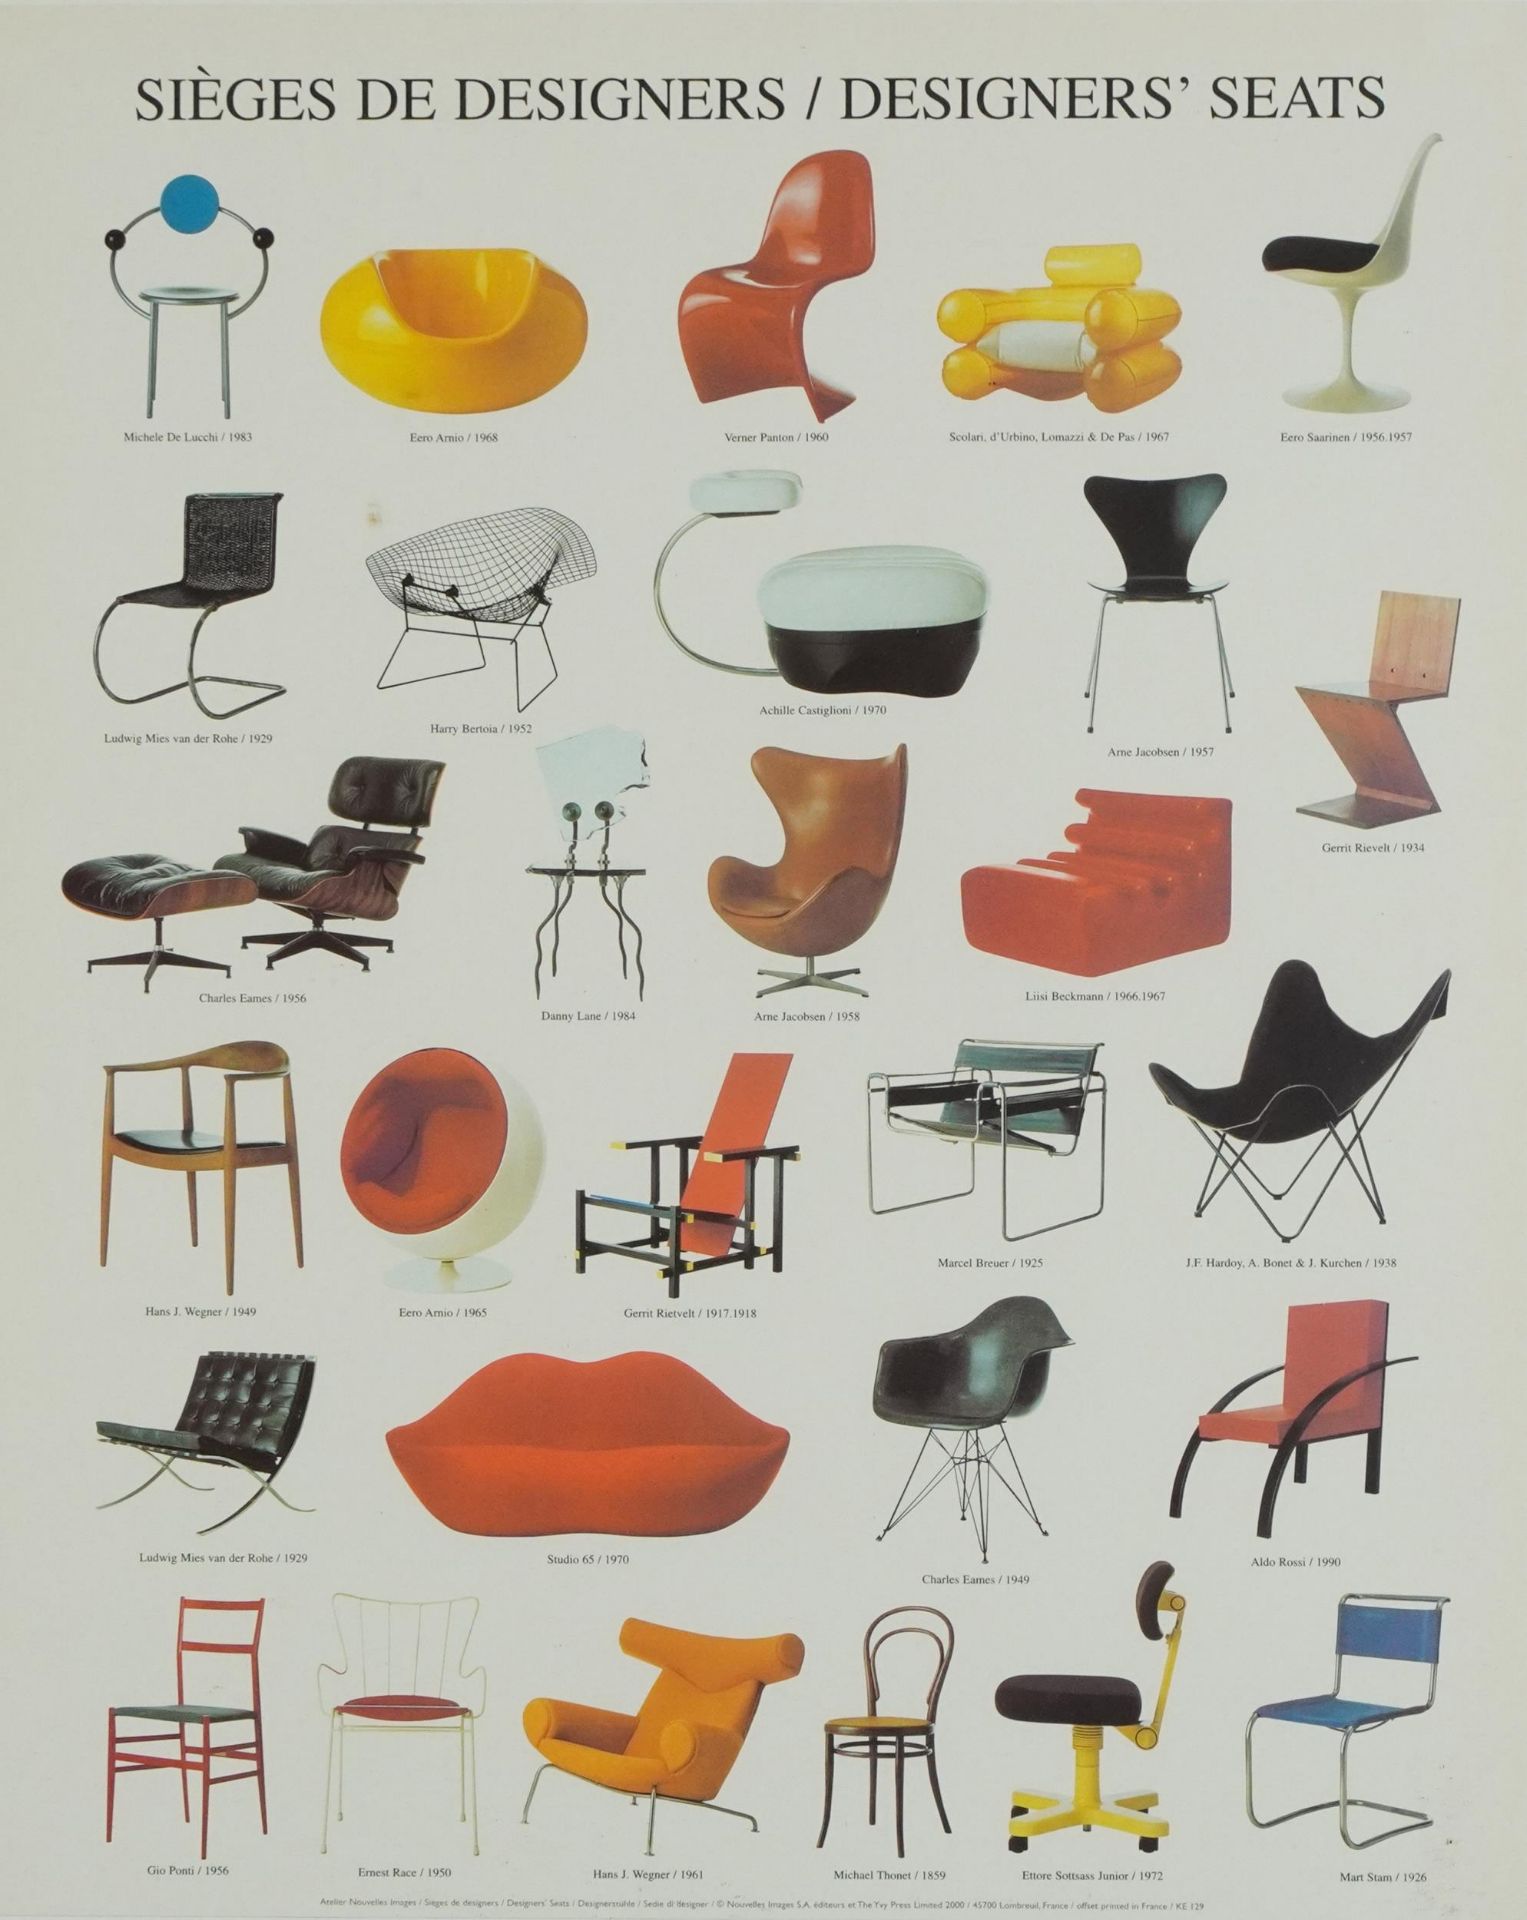 Designer's Seats, mid century style poster published The YVY Press Limited, offset printed in